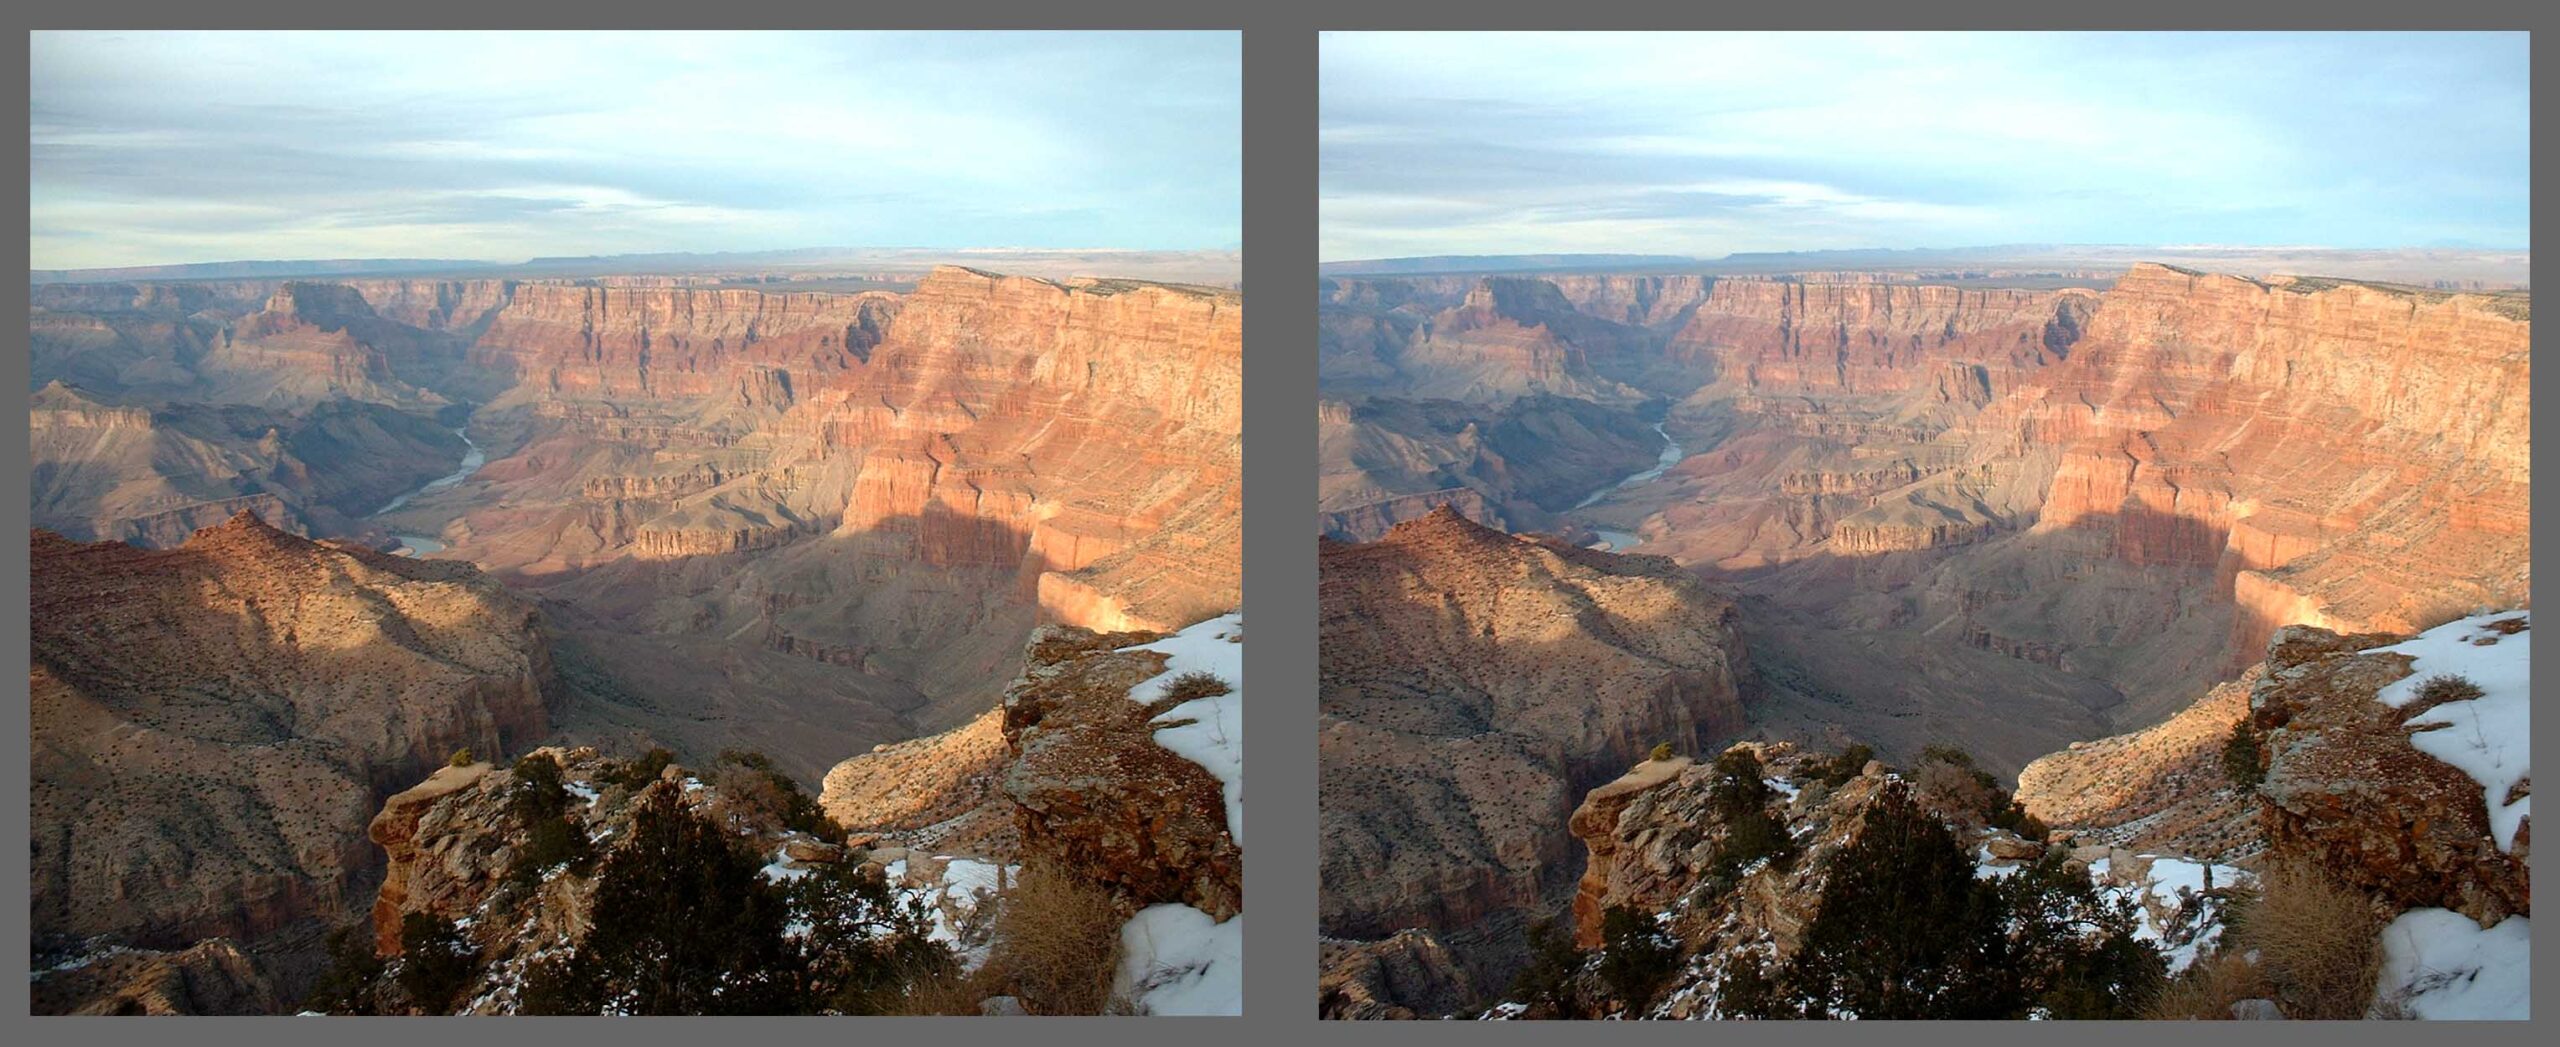 Stereo Photo - Grand Canyon View F - Cross-eyed viewing method